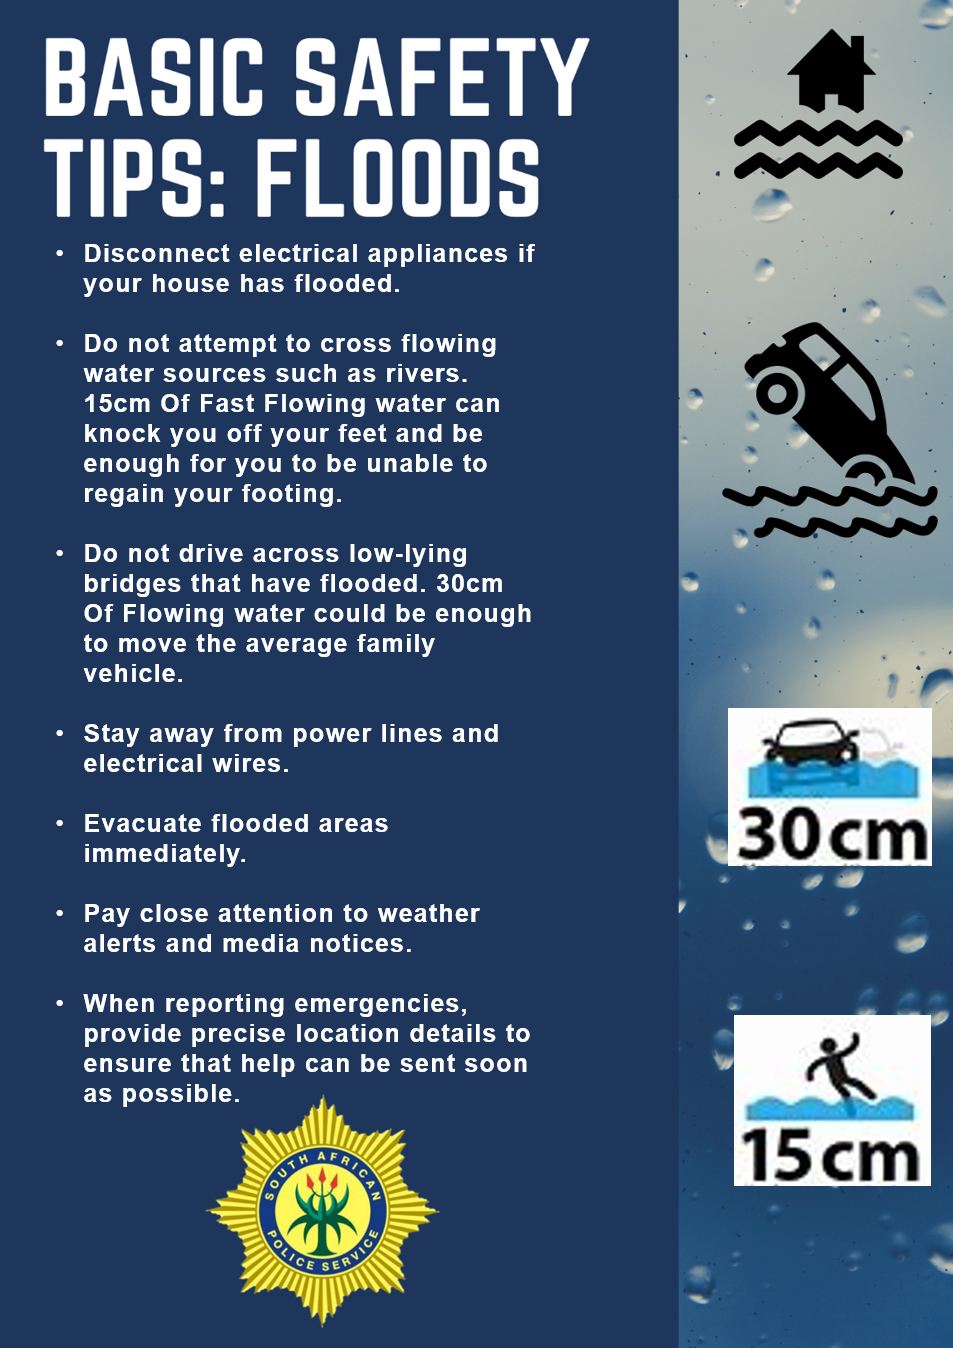 SAPS urges everyone to take safety measures to keep themselves safe in stormy weather